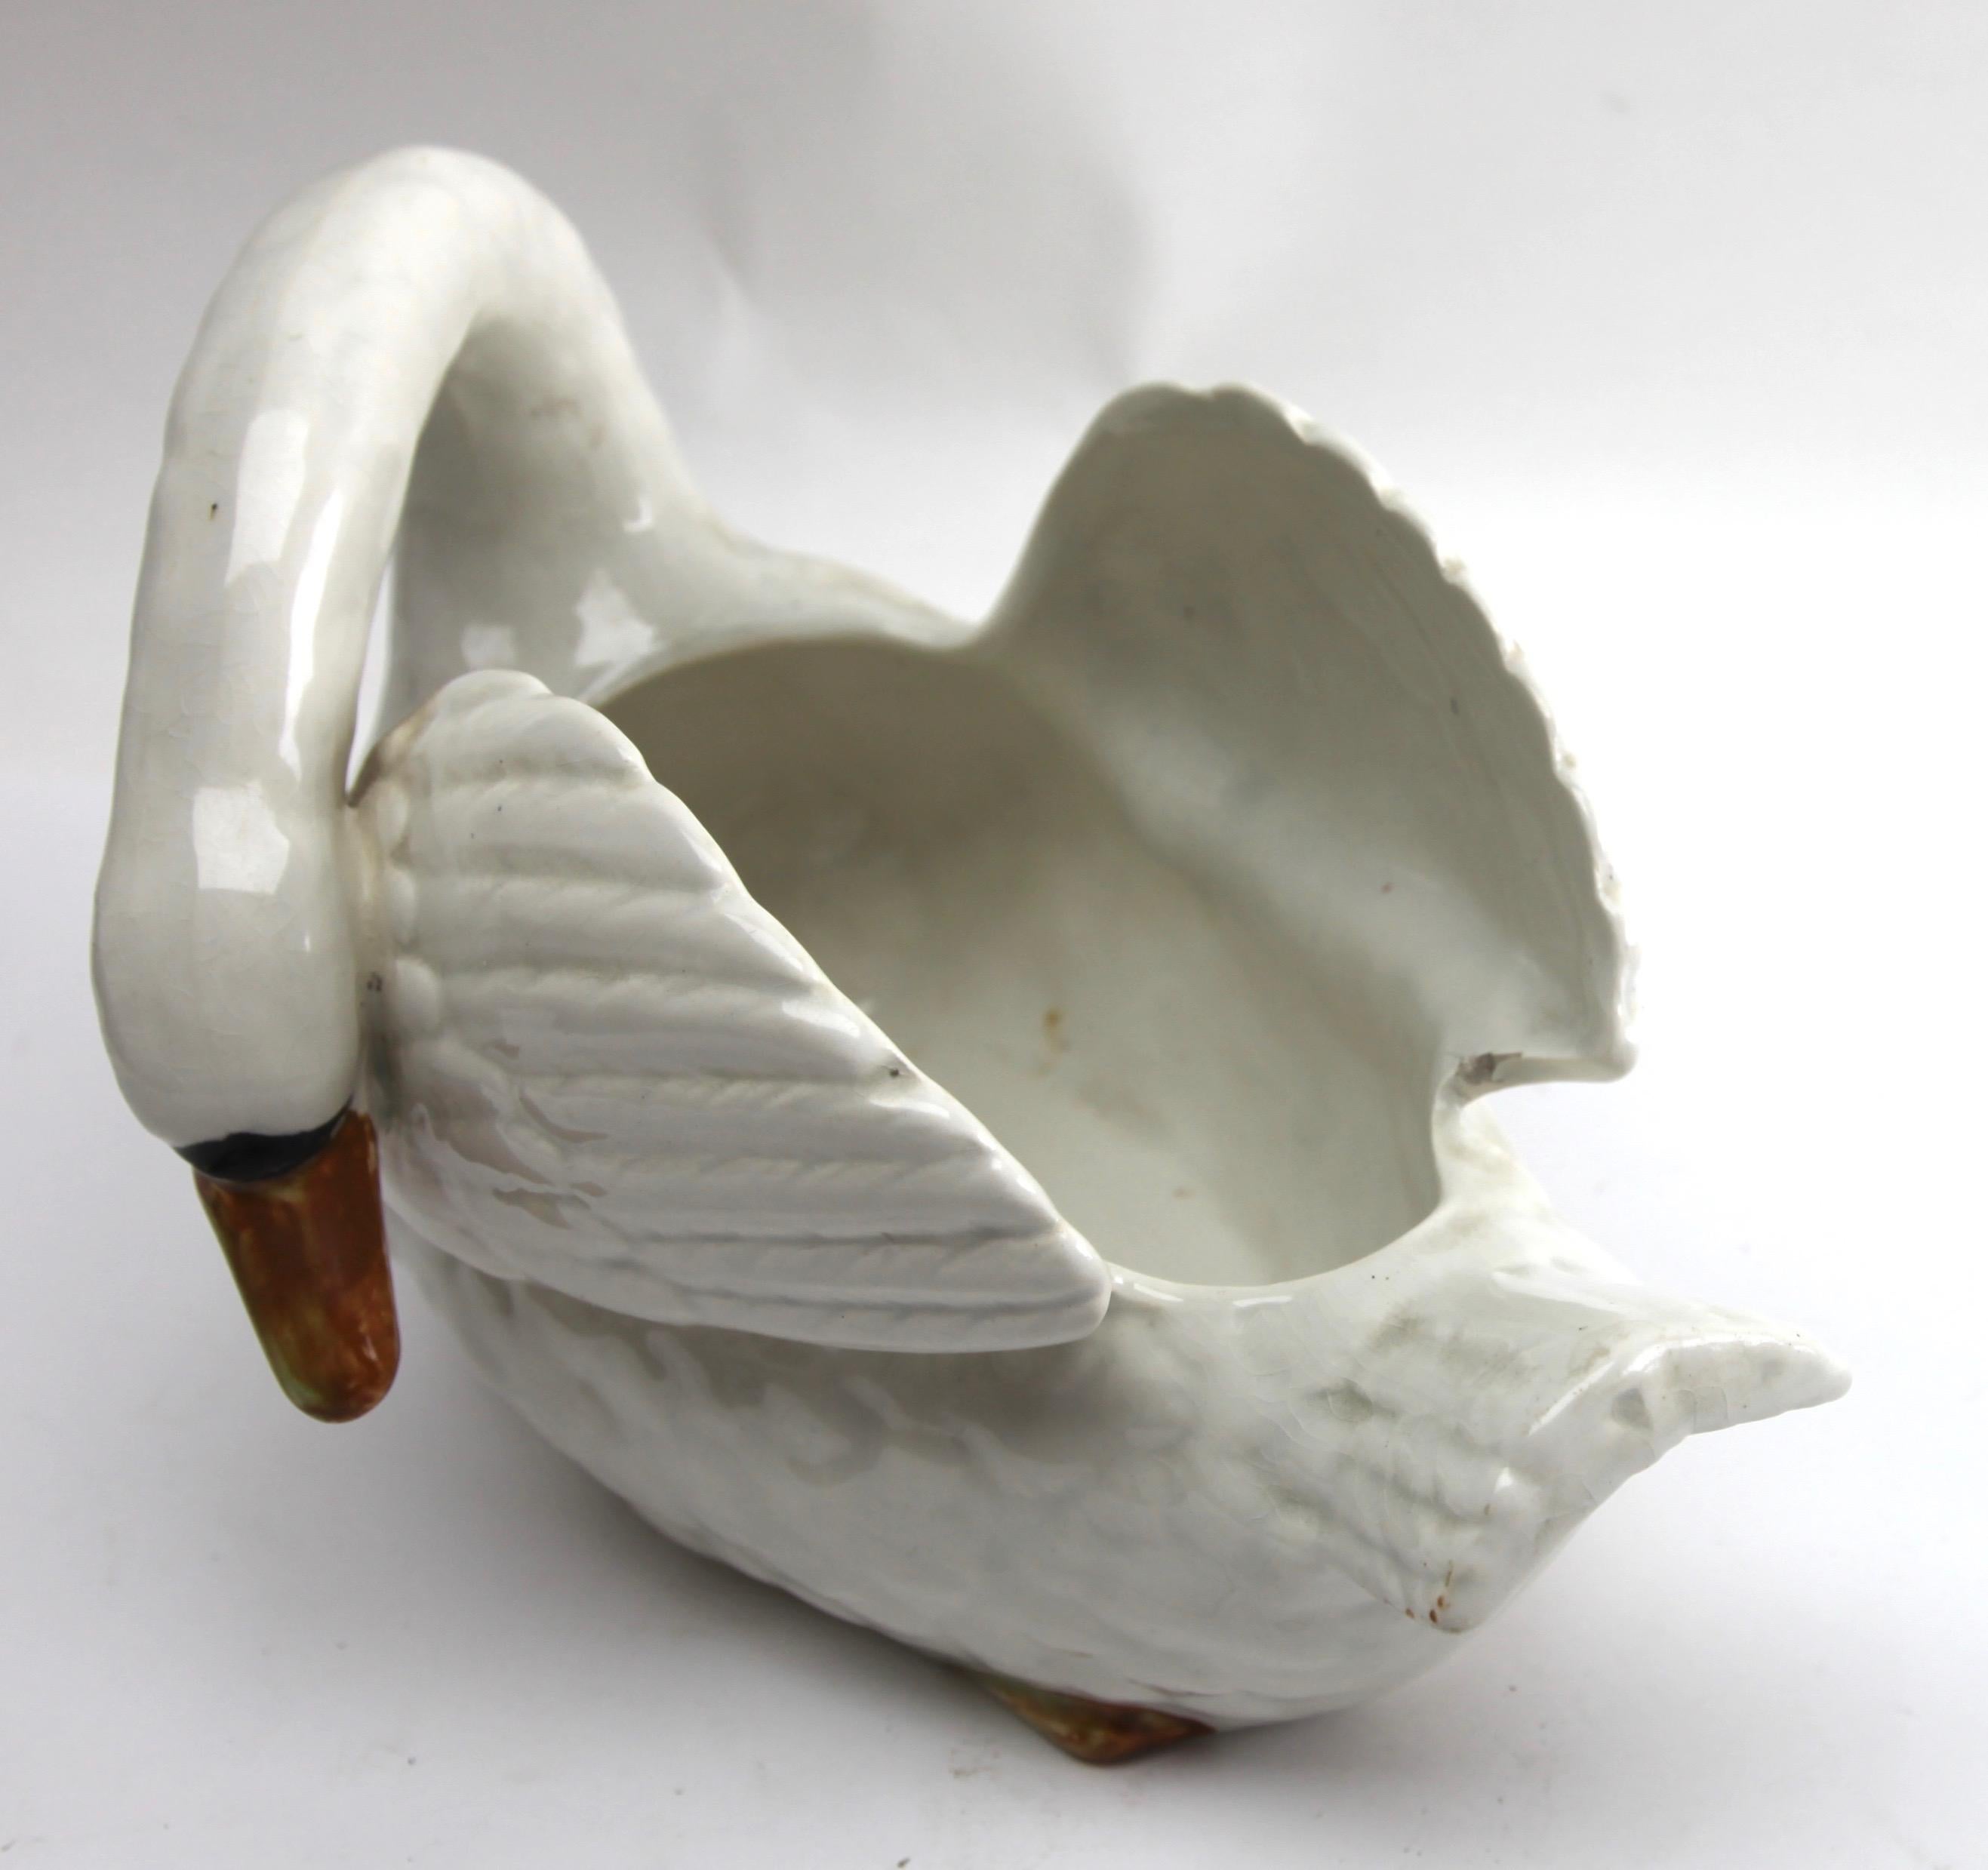 Majolica set of white swans jardinière stamped Imperiale Nimy, Belgium, circa 1900

Stamped: Nimy Faiences imperiale 1789-1951 Belgium.
Dimensions small one:
Height 5.51 inch
Width 8.66 inch
Depth 5.51 inch.








  